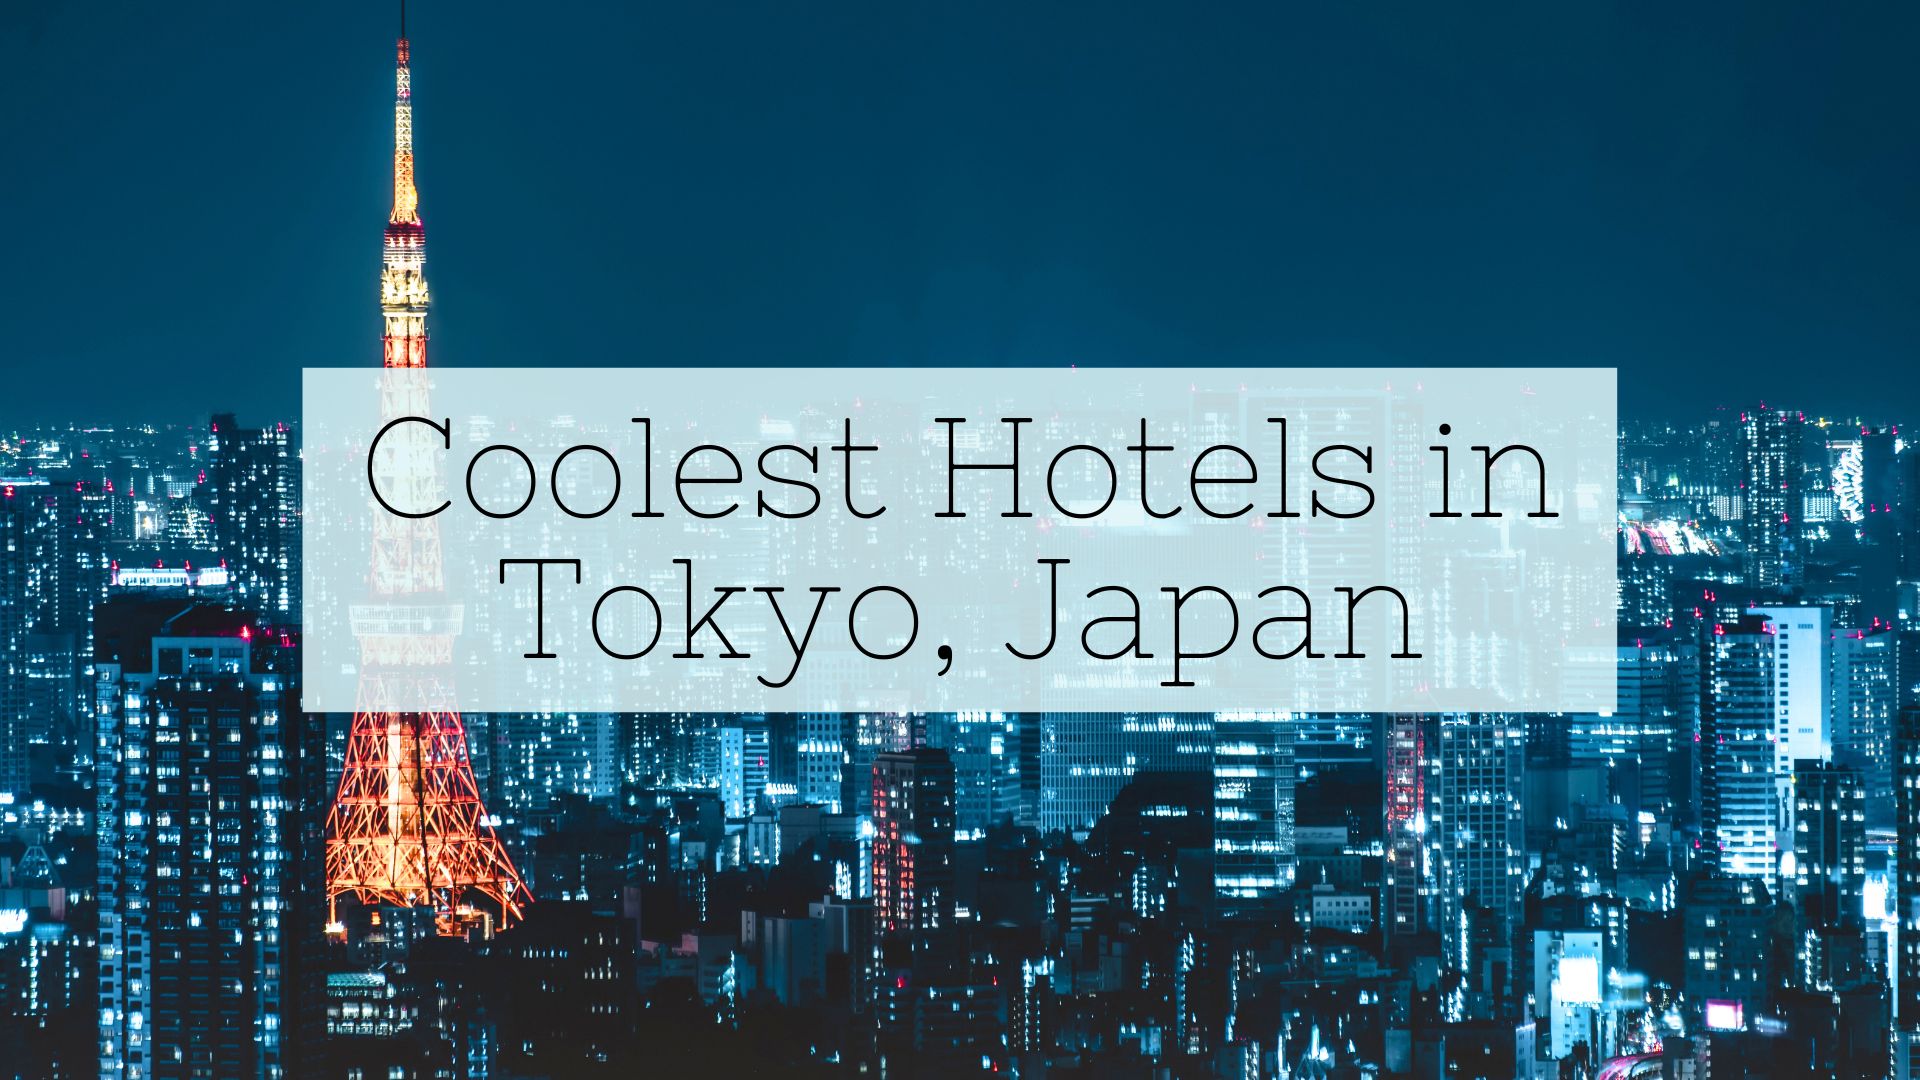 COOLEST hotels in Tokyo, Unique hotels in Tokyo, Cool hotels in Tokyo, Cheap hotels in Tokyo, best Tokyo hotels near the Yamanote Line, Budget tokyo hotels, Tokyo hotels with Onsen, Tokyo hotels for families, hotels near the Yamanote line, hotels near the yamanote line tokyo, hotels near JR yamanote line, tokyo hotels near yamanote line, hotels near JR yamanote line tokyo, cool and unique hotels in Tokyo Japan